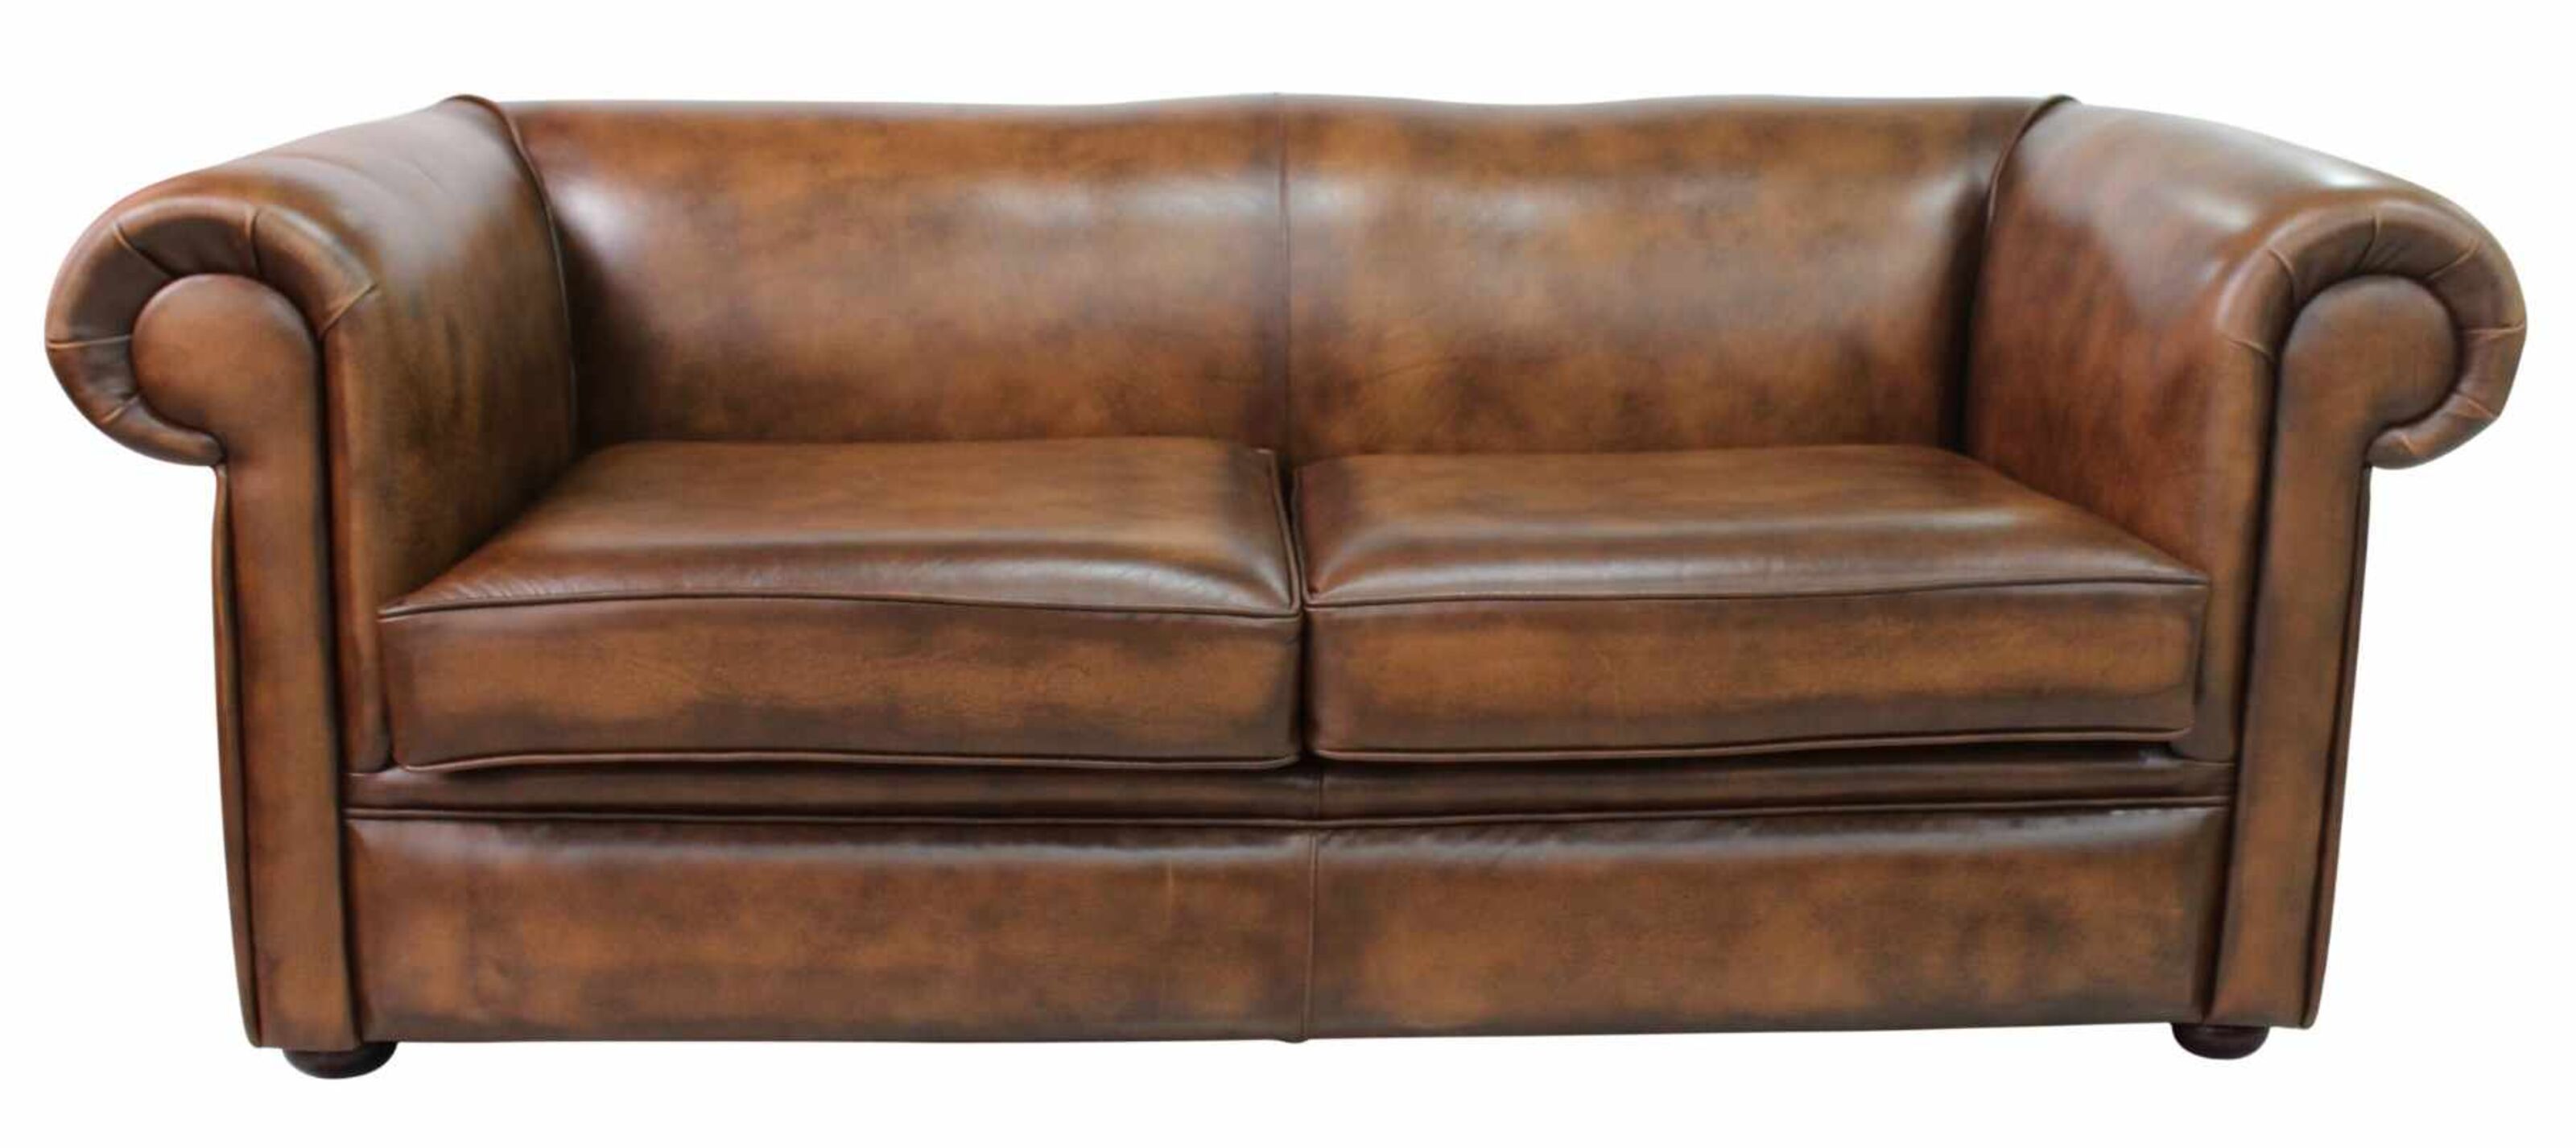 Alfresco Elegance Choosing a Chesterfield Sofa for Outdoor Living  %Post Title